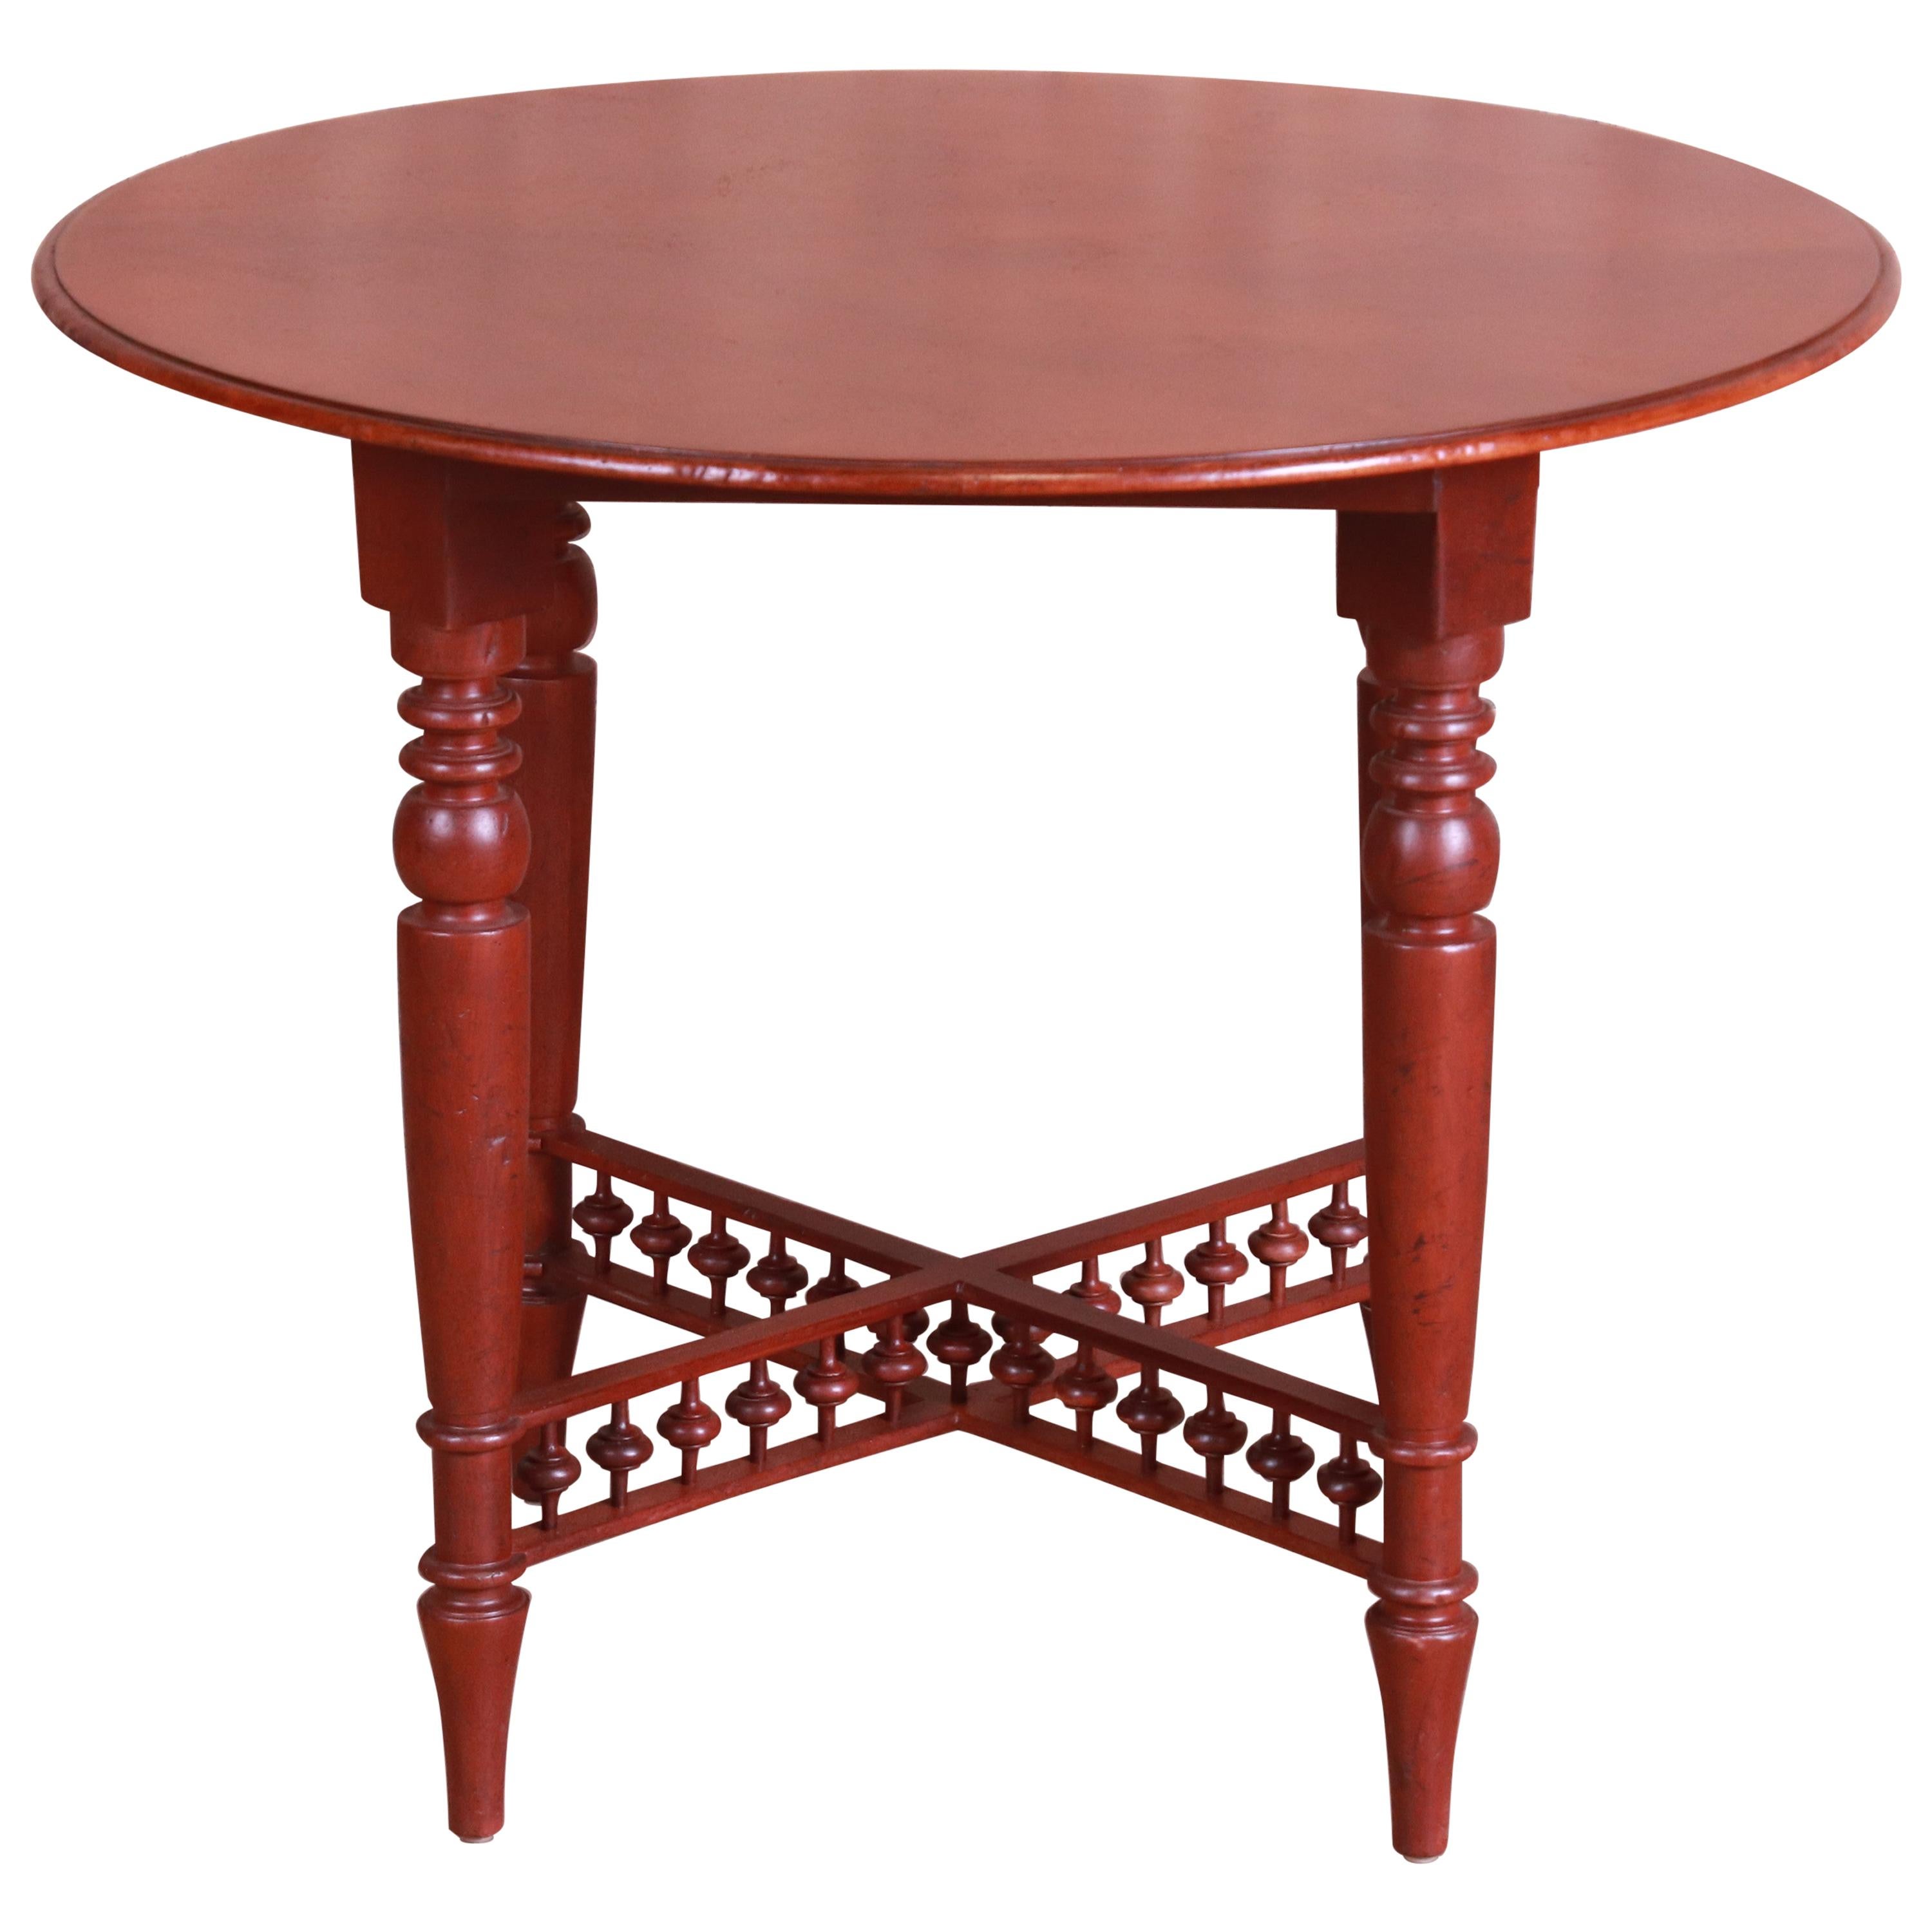 Baker Furniture Milling Road American Colonial Carved Mahogany Tea Table